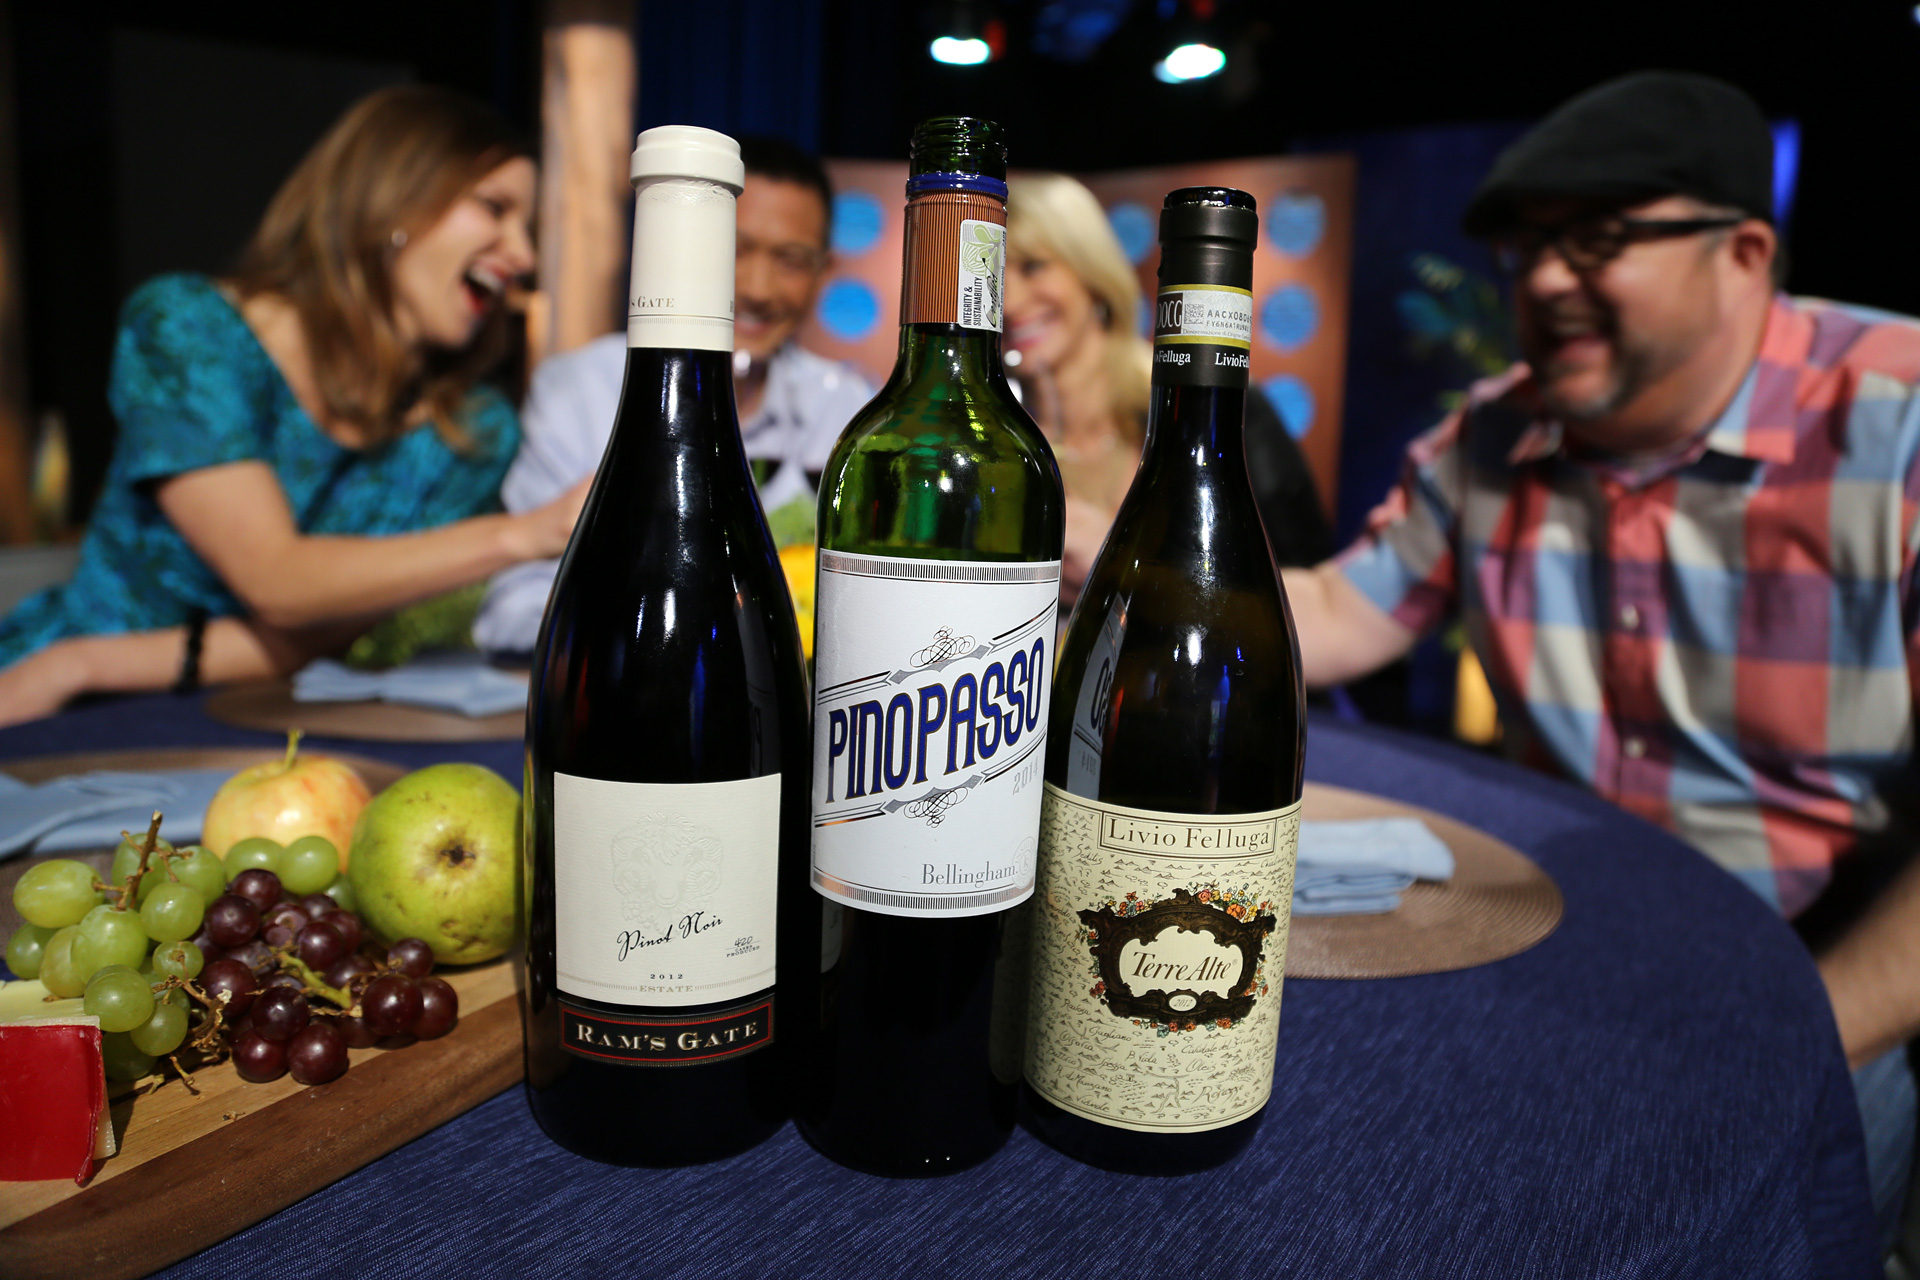 Wines that guests drank on the set of the ninth episode of season 11.